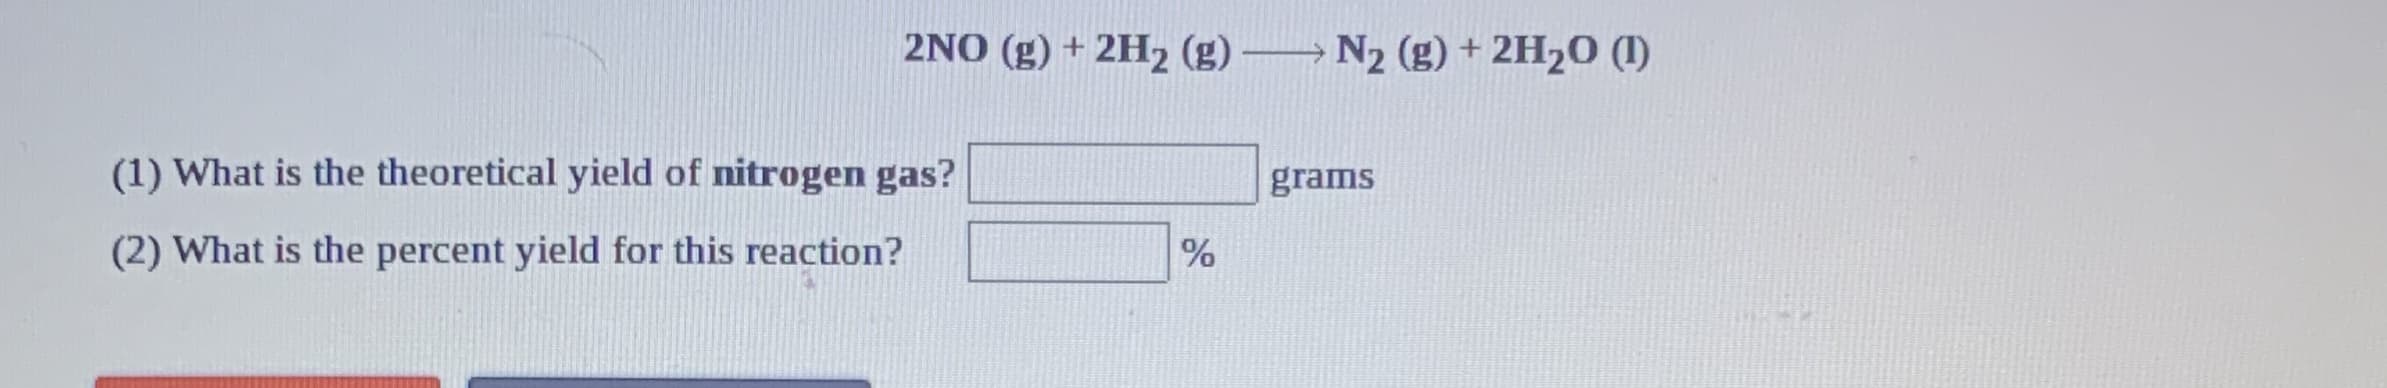 2NO (g) + 2H2 (g) → N2 (g) + 2H2O (I)
(1) What is the theoretical yield of nitrogen gas?
grams
(2) What is the percent yield for this reaction?
